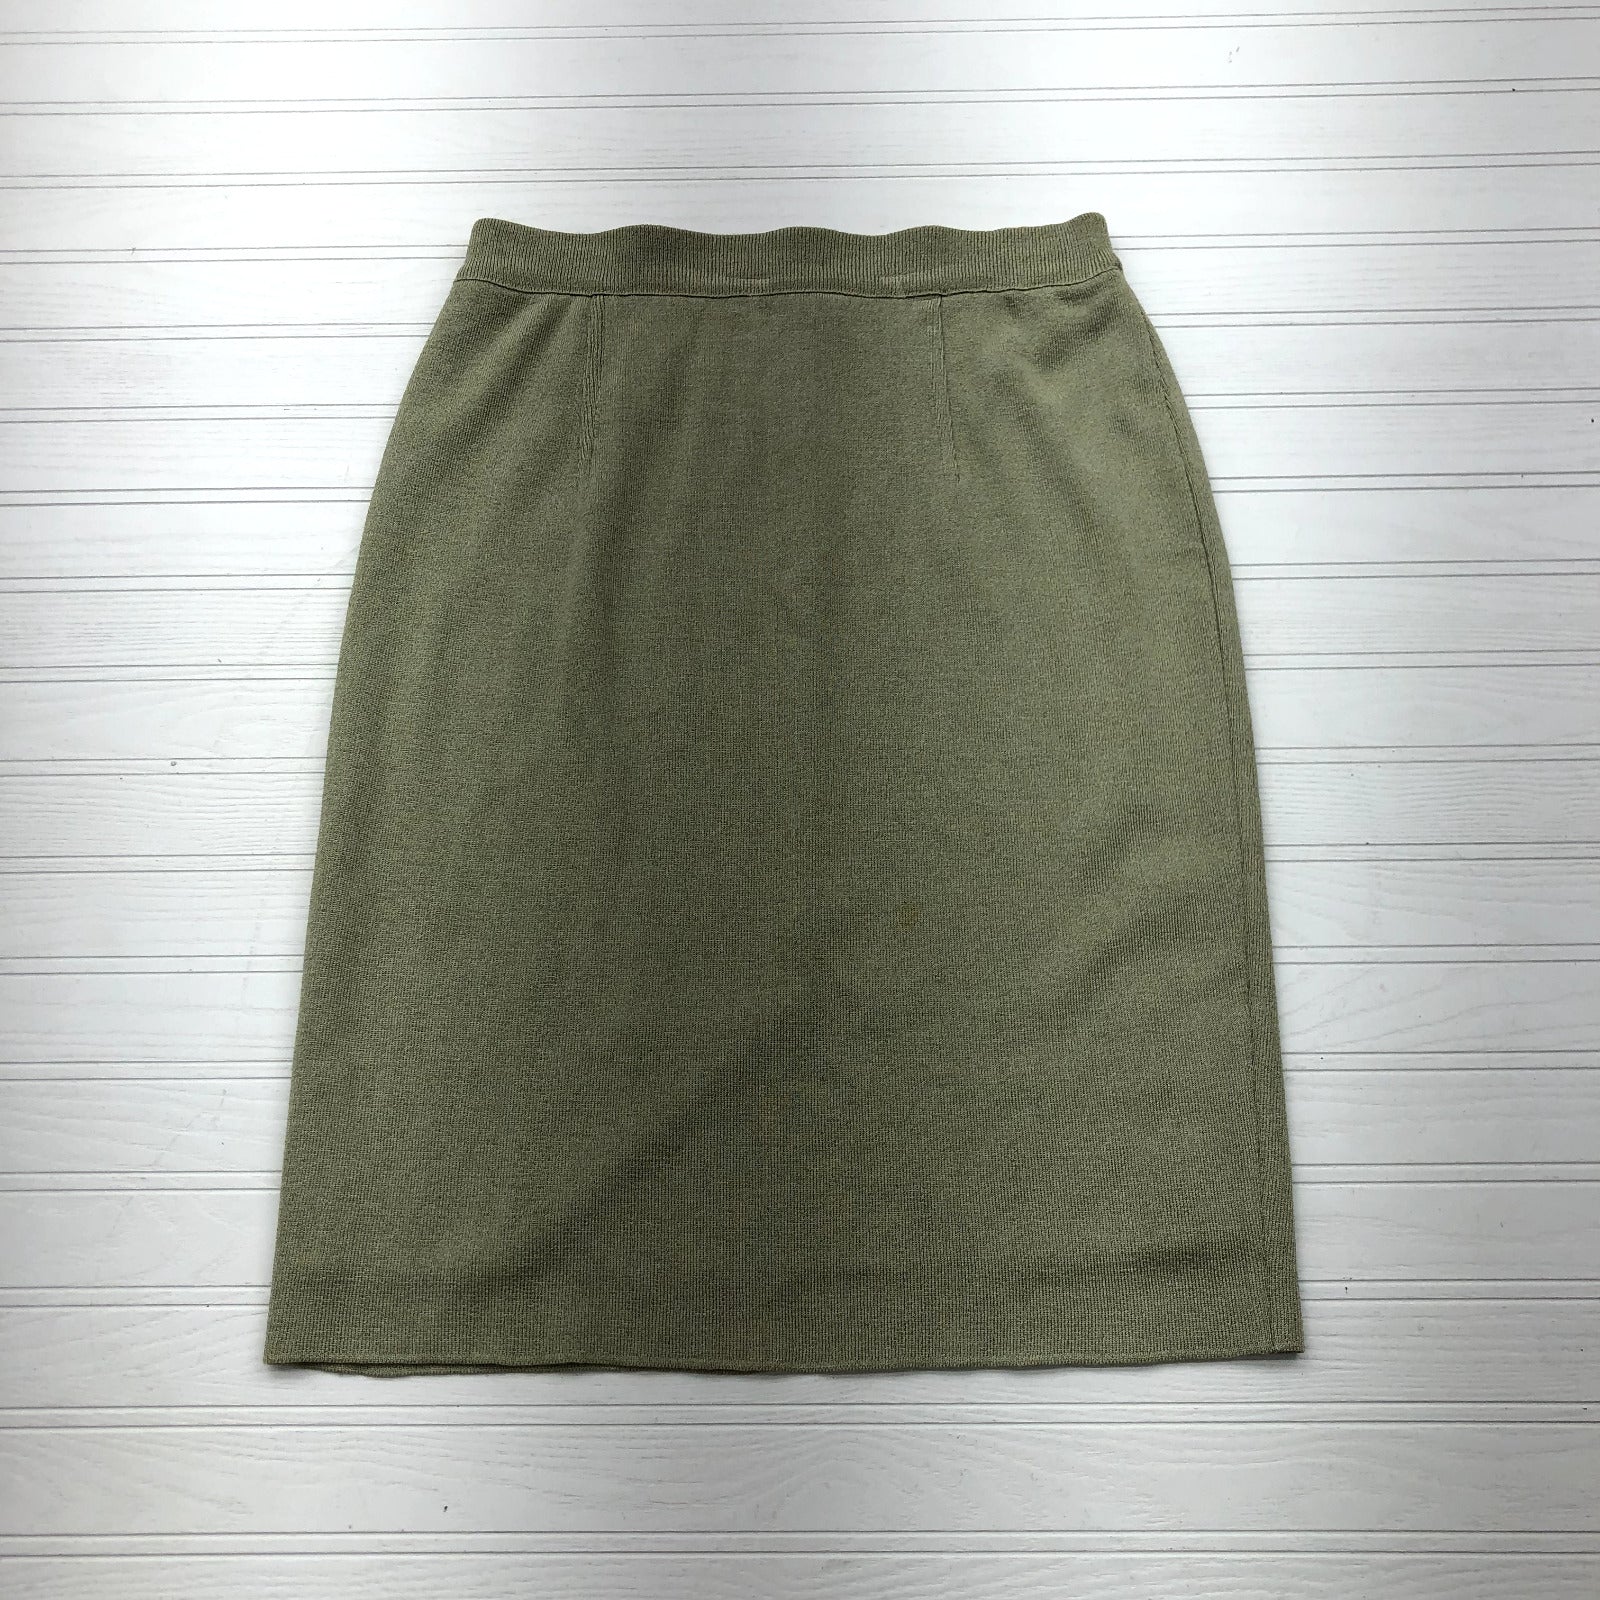 Vintage GISPA Green Tight Knit Lined Pencil Skirt With Back Slit Womens Size 10